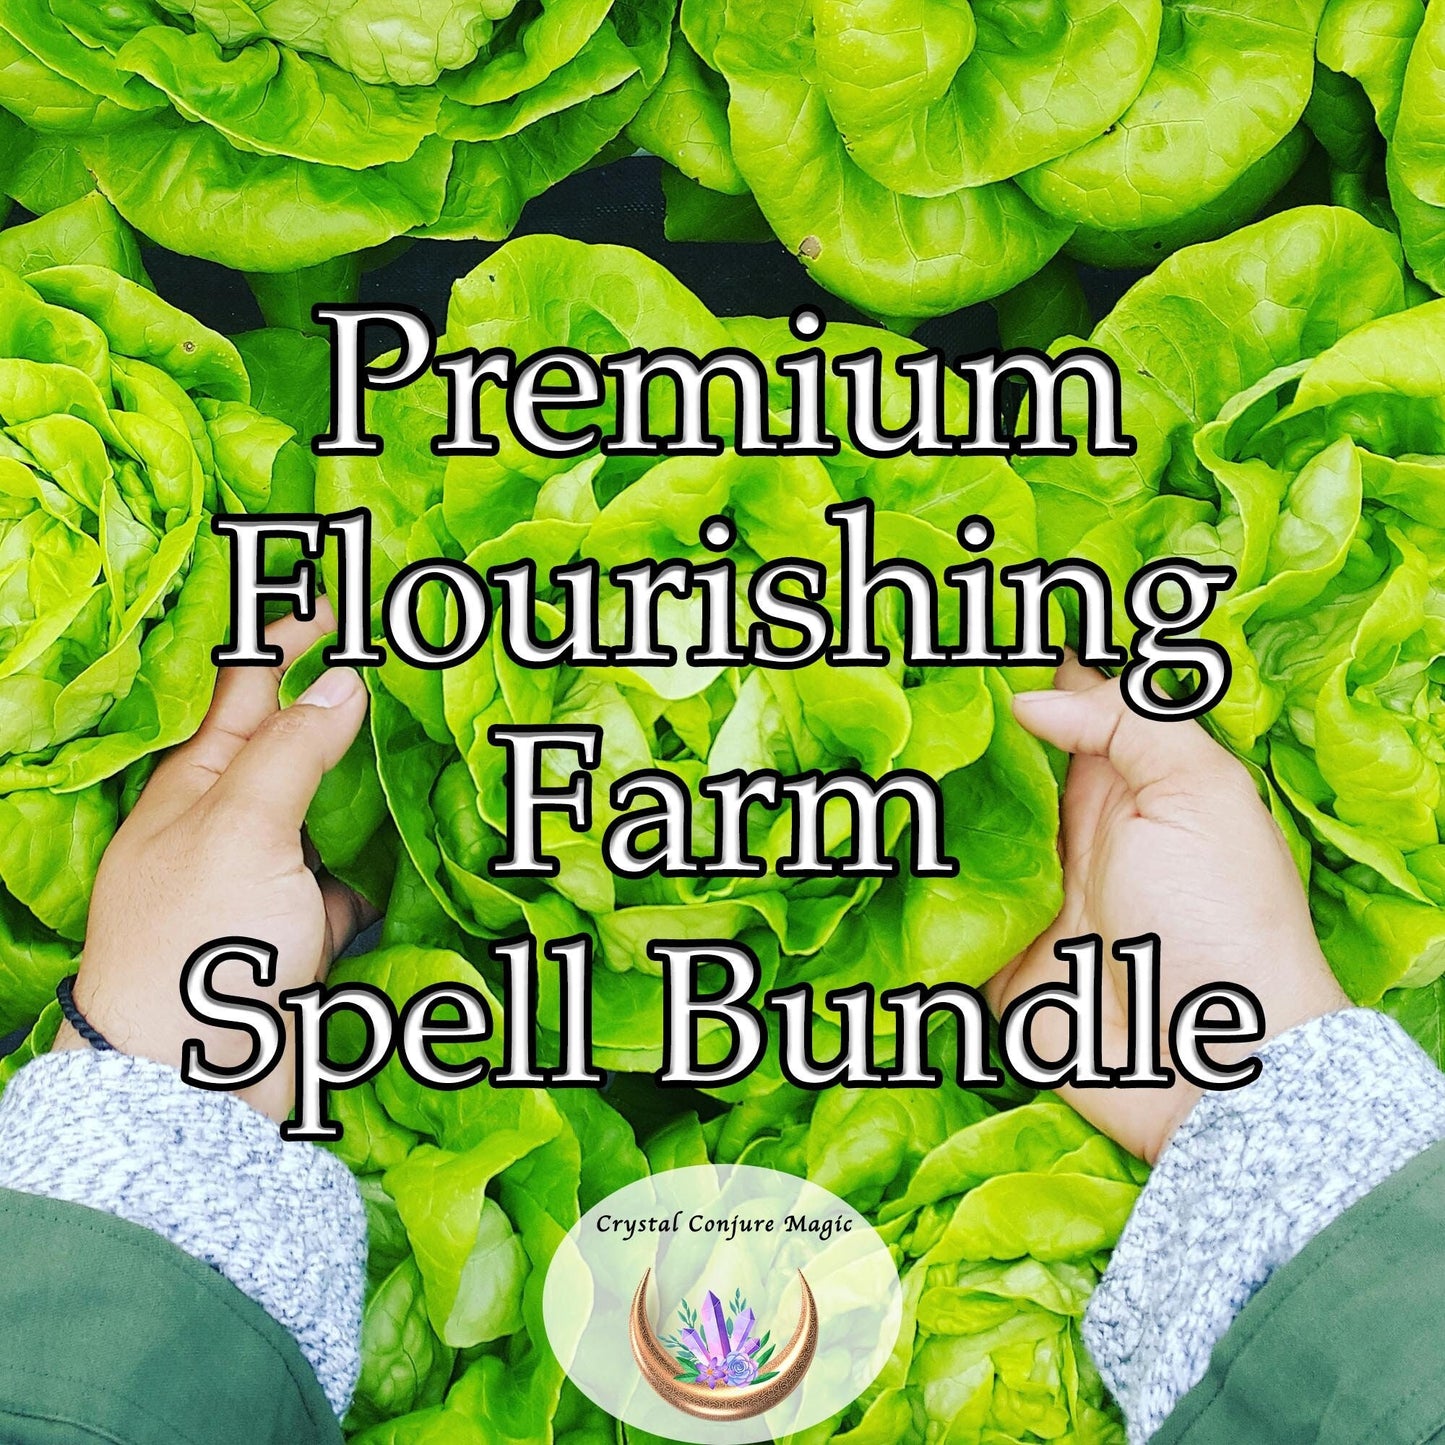 Premium Flourishing Farm Spell Bundle - envision your fields thriving and your animals in good health